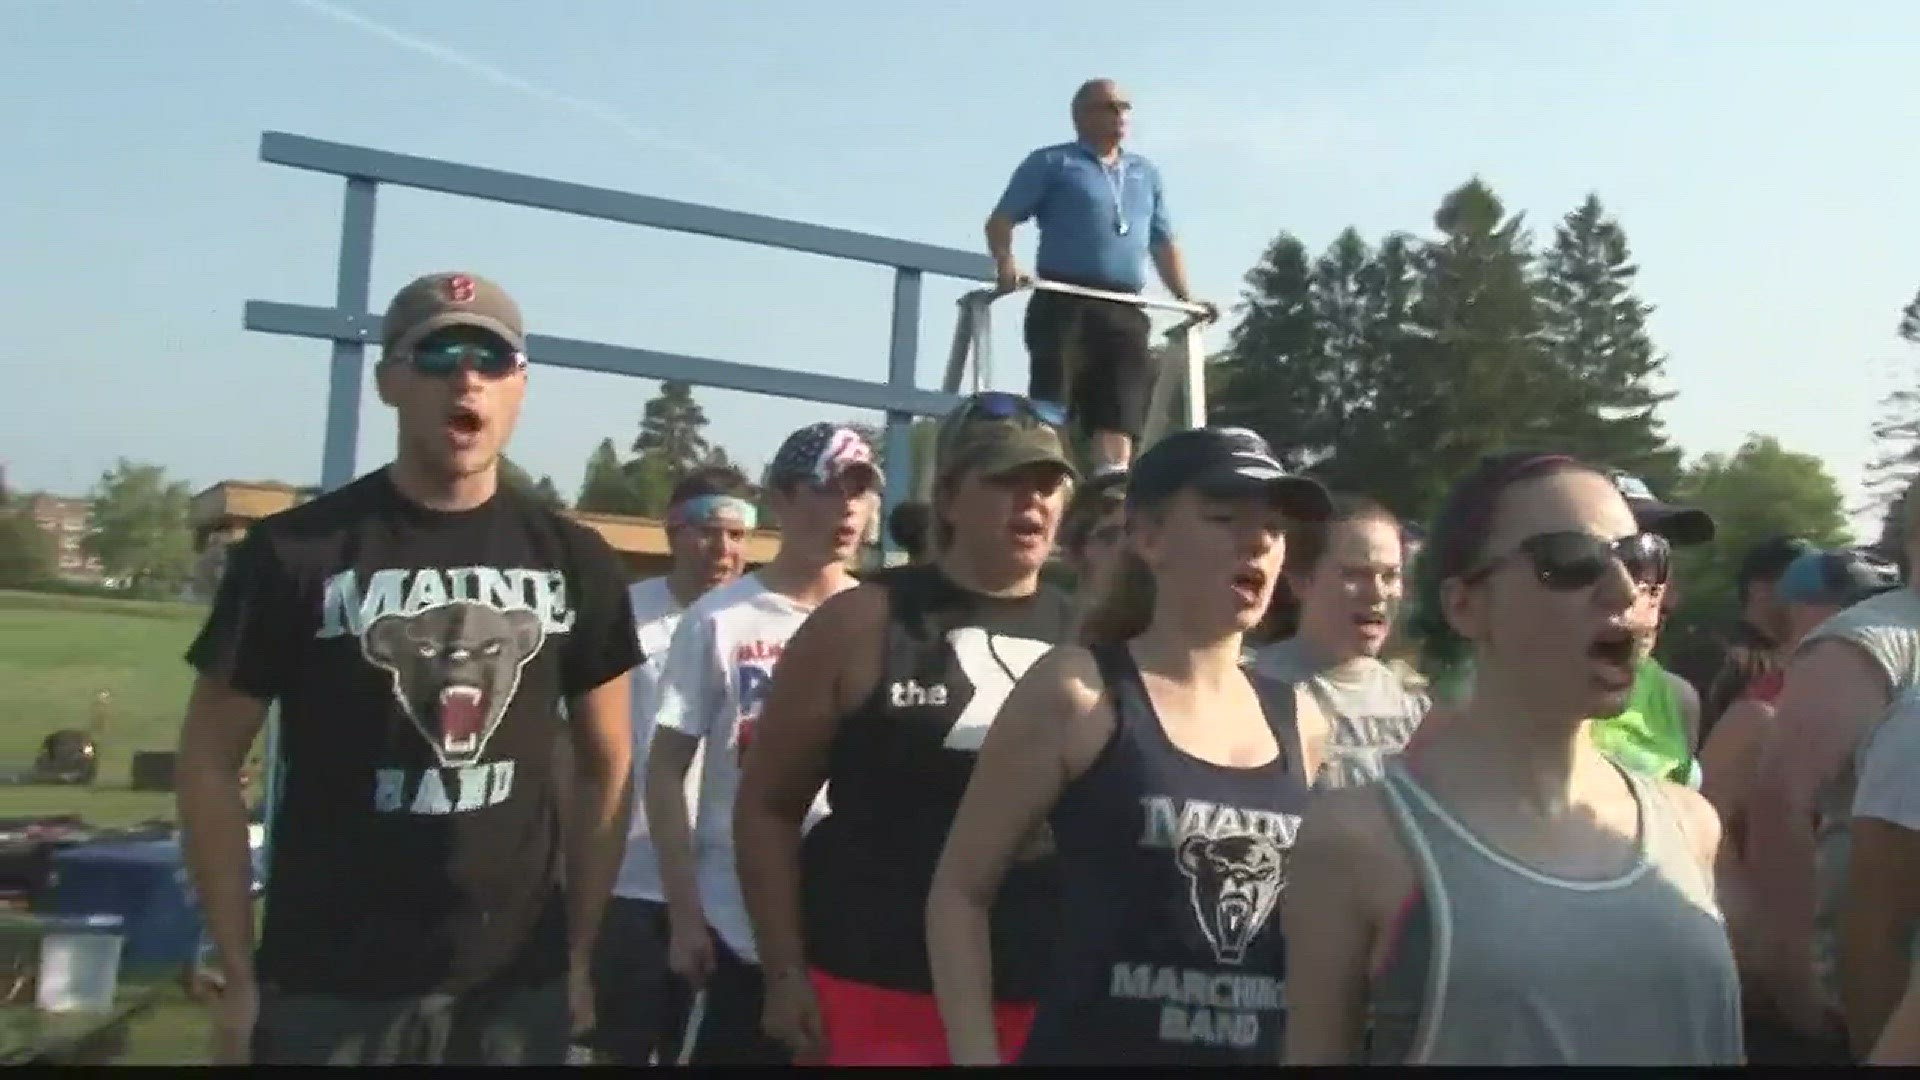 University of Maine marching band gets ready for the season